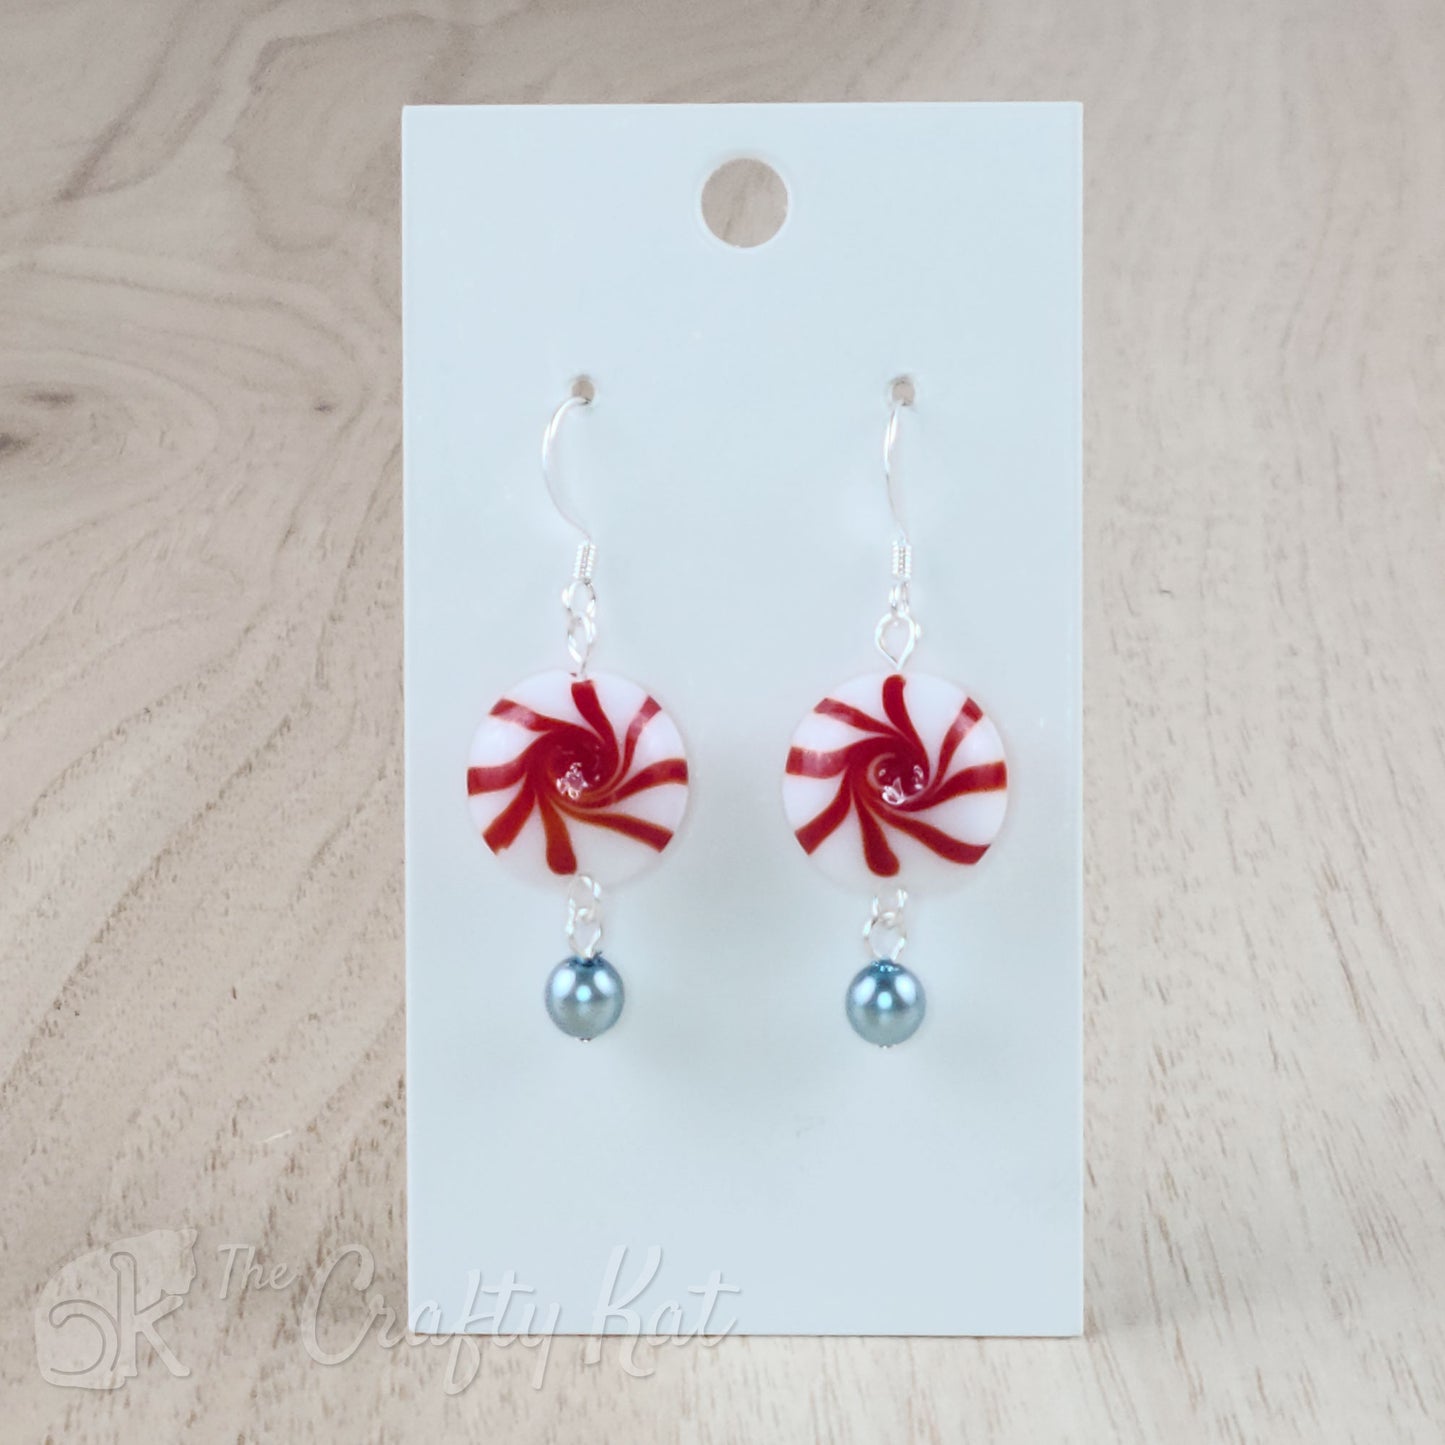 A pair of earrings featuring lampwork glass beads in the shape of classic "starlight" peppermint candies, accented with a light blue glass pearl on silver base metal.